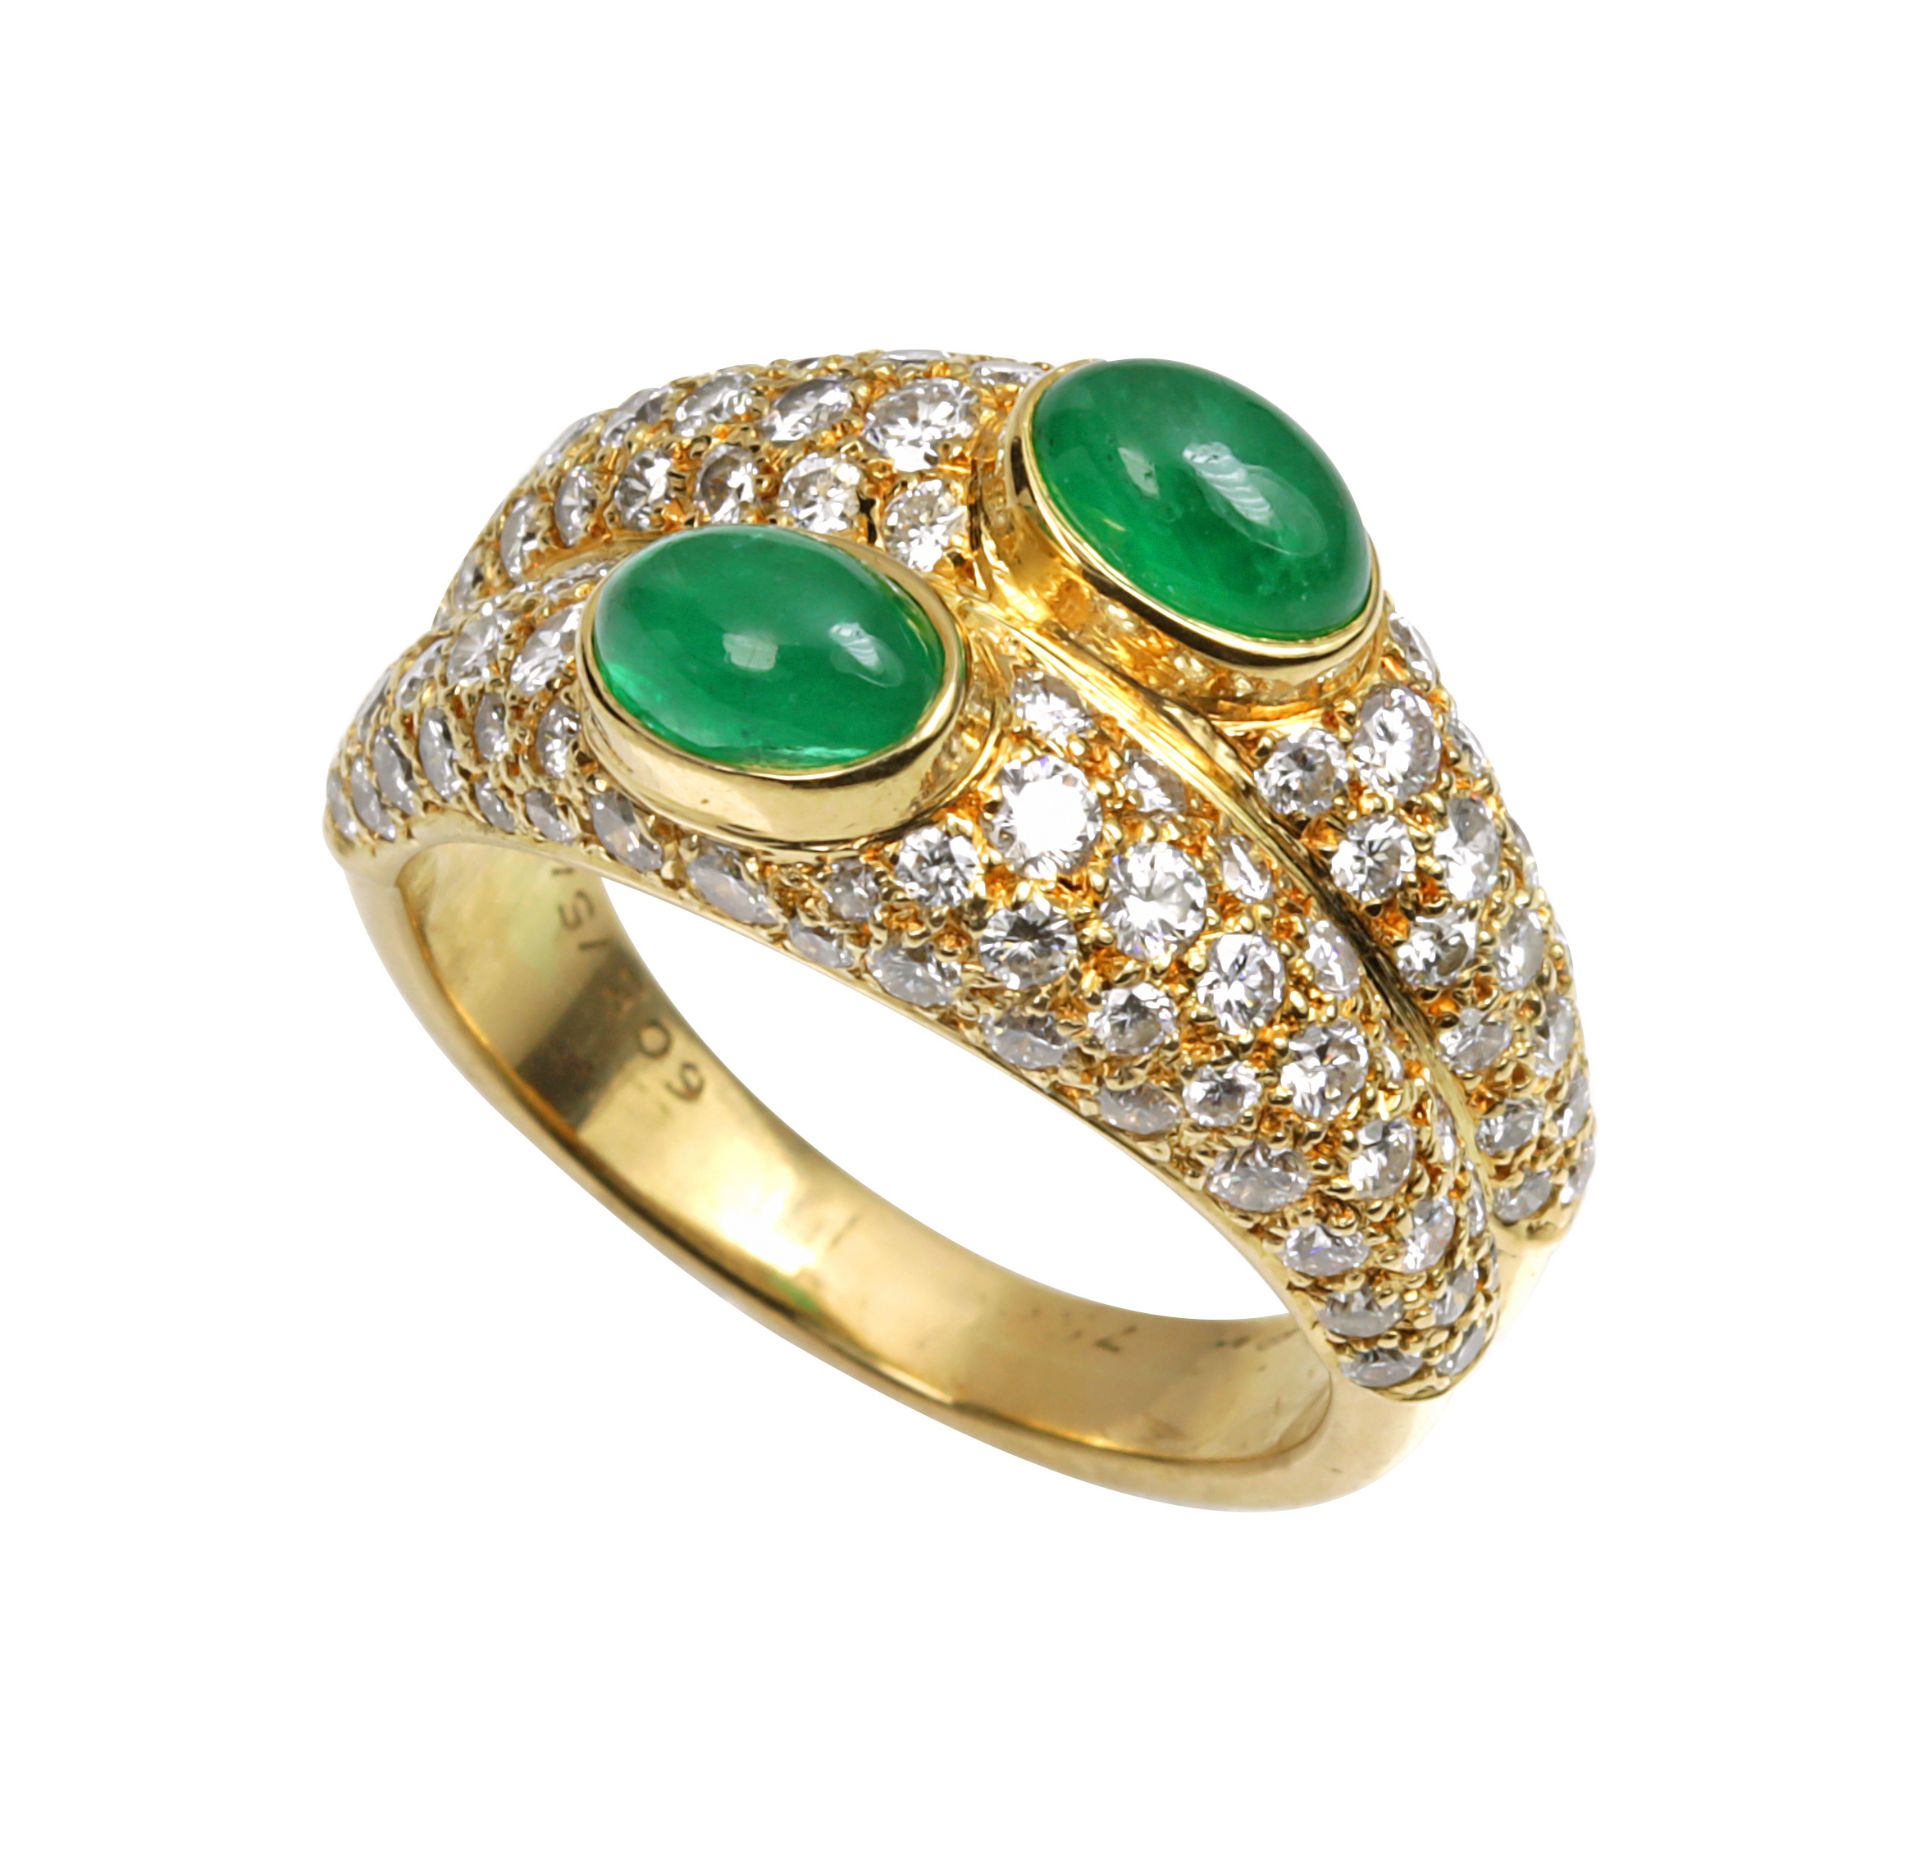 AN EMERALD AND DIAMOND DRESS RING, CARTIER in 18ct yellow gold, the double band design set with